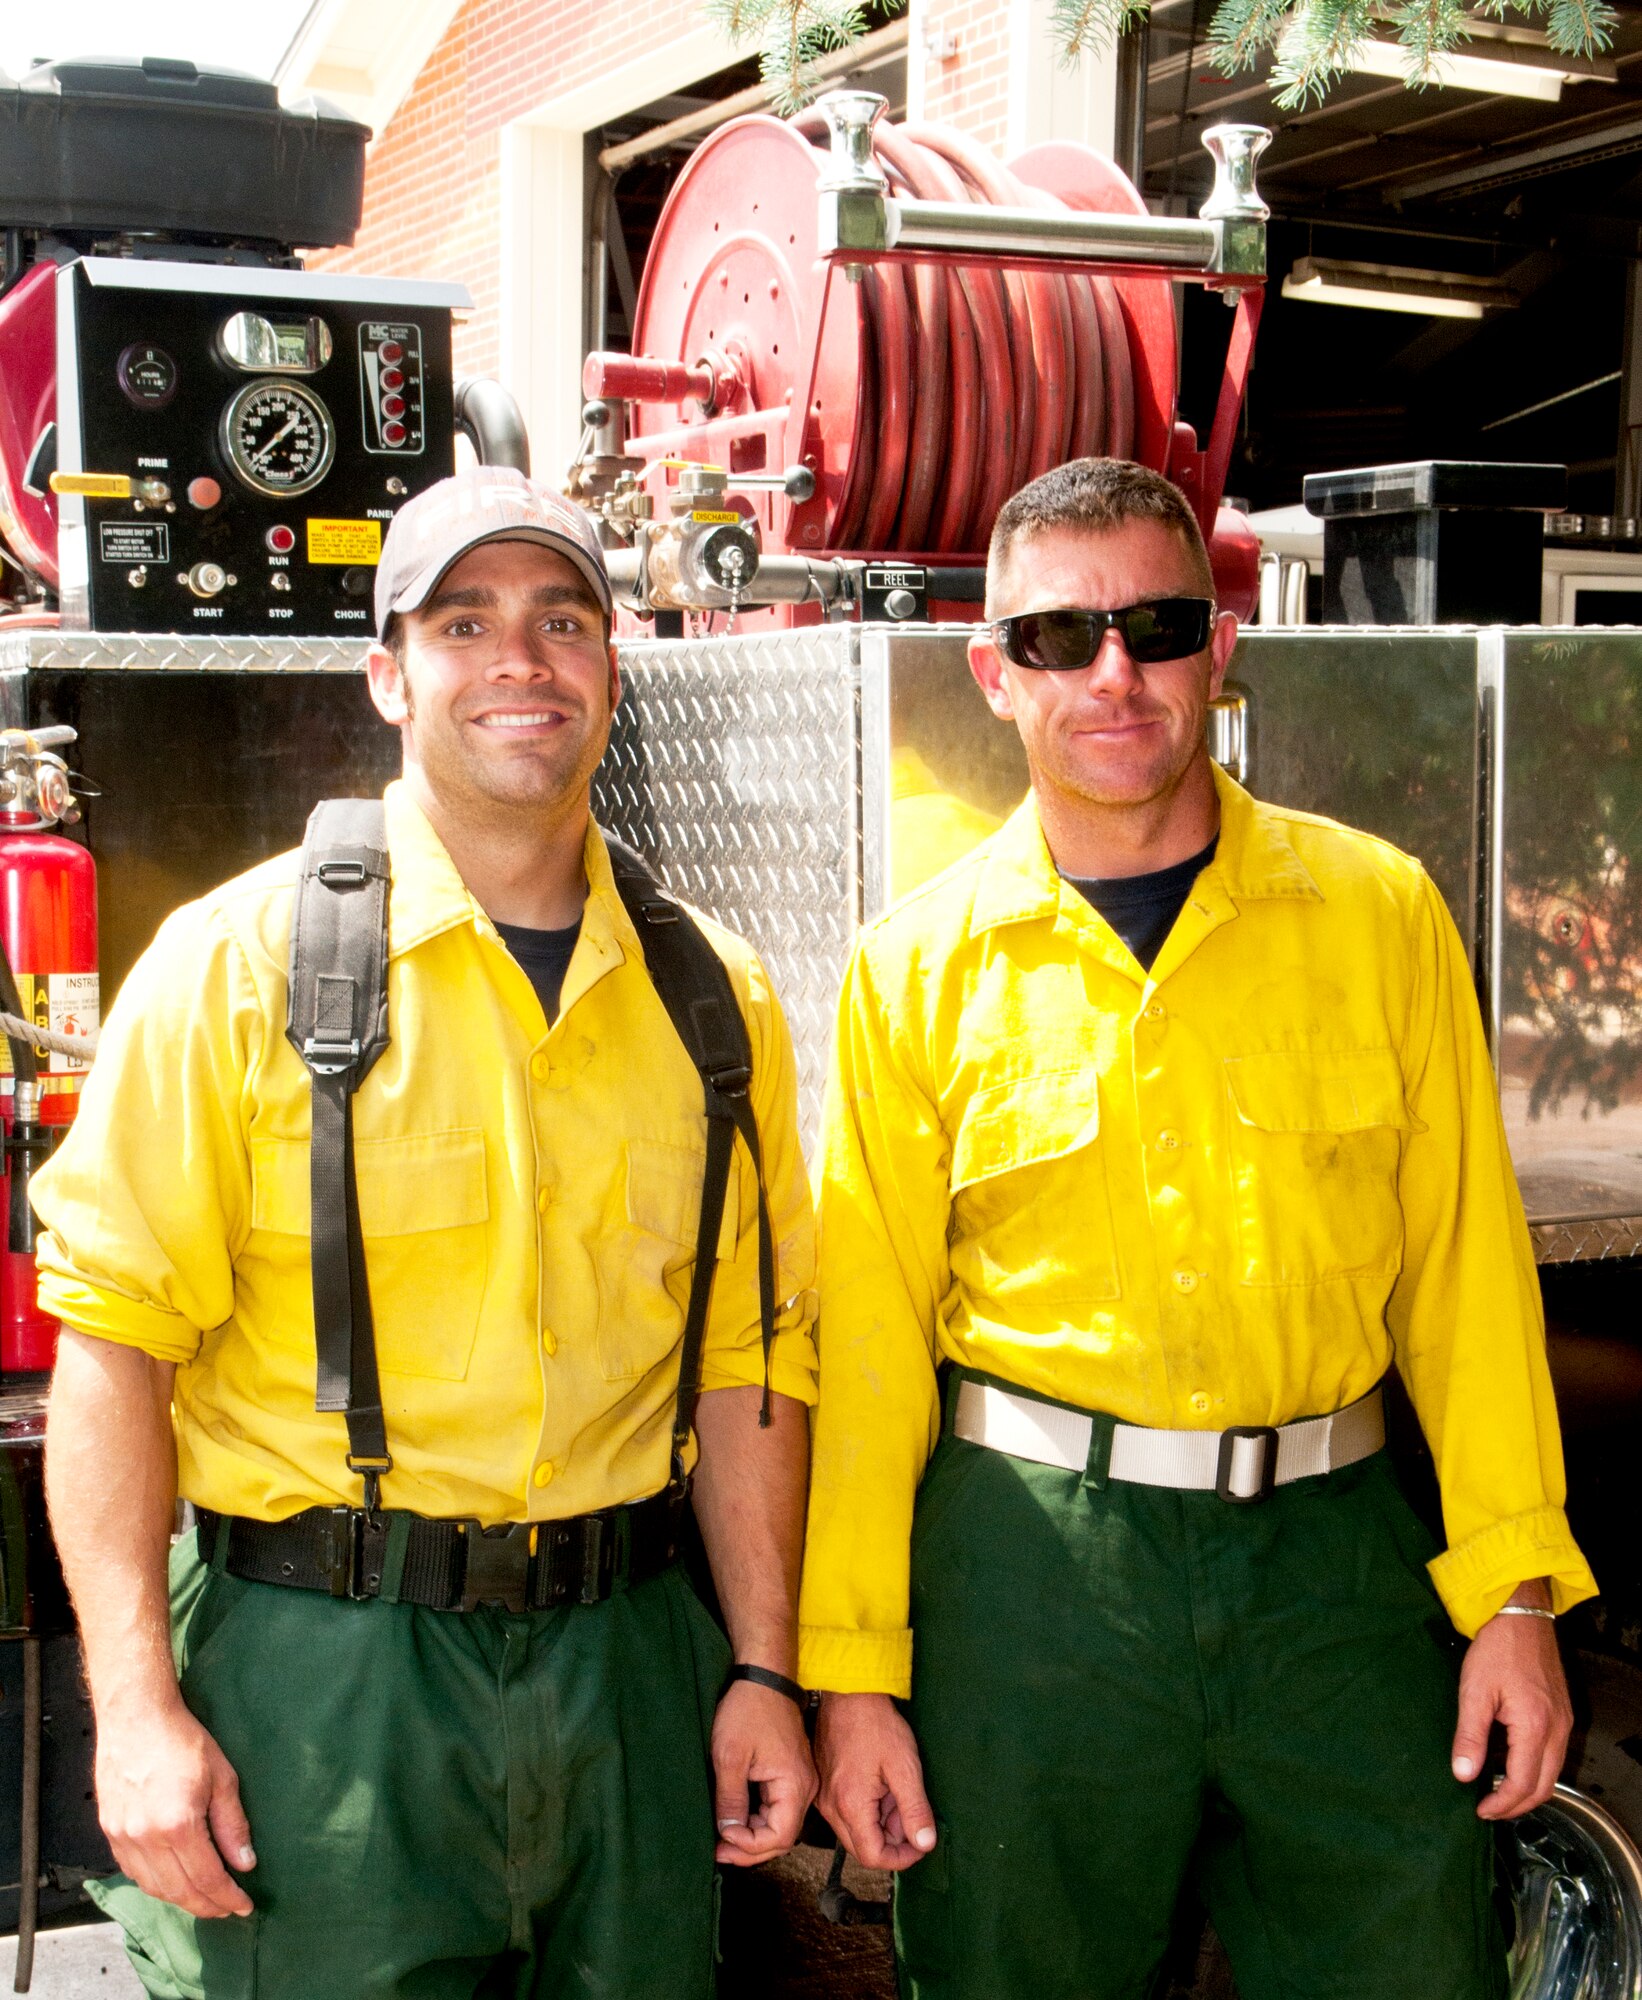 Heath Bichel and Jesse Johnson, 90th Civil Engineer Squadron firefighters,  pose outside of Building 324 in front of Brush 15, the fire truck they drove to Colorado Springs, Colo., to fight wildfires that threatened the U.S. Air Force Academy from June 27 to June 29. (U.S. Air Force photo by Airman 1st Class Jason Wiese)